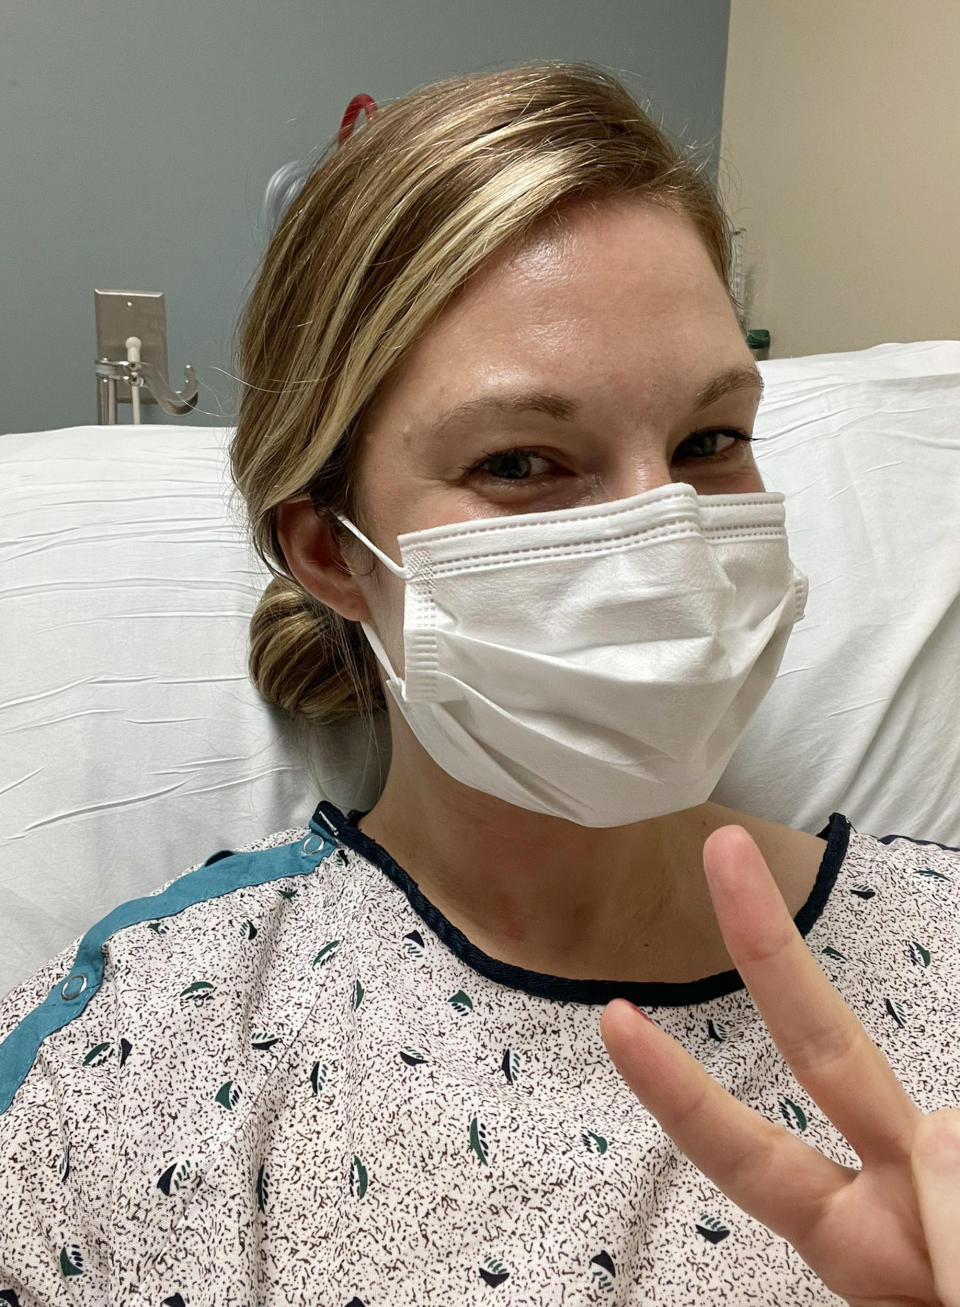 Being the patient in a room where she has performed surgery felt weird to Dr. Jocelyn Fitzgerald. But her experience will change how she talks to her patients about surgery in the future. (Courtesy Jocelyn Fitzgerald)